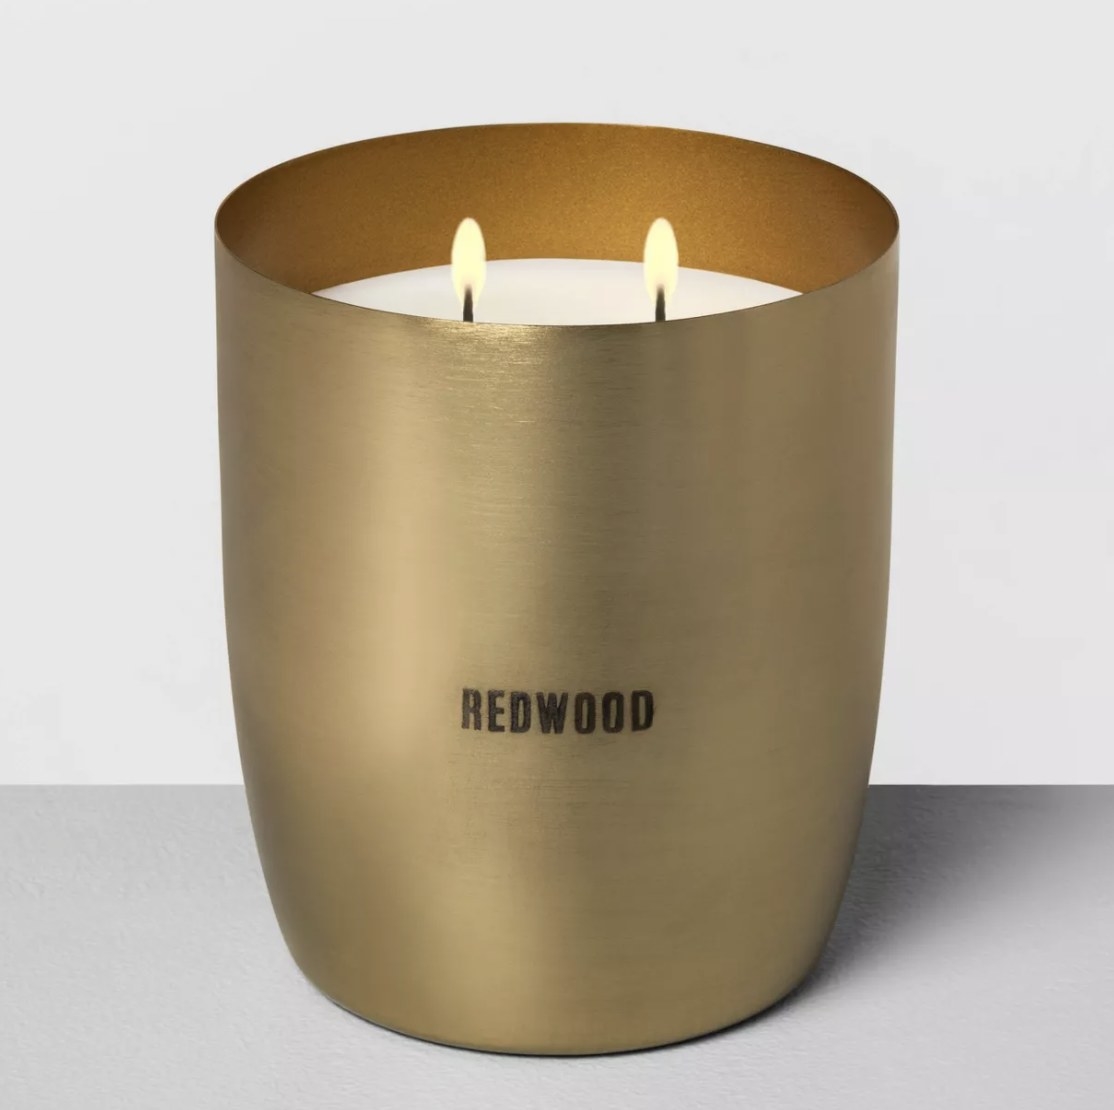 The candle in the redwood scent